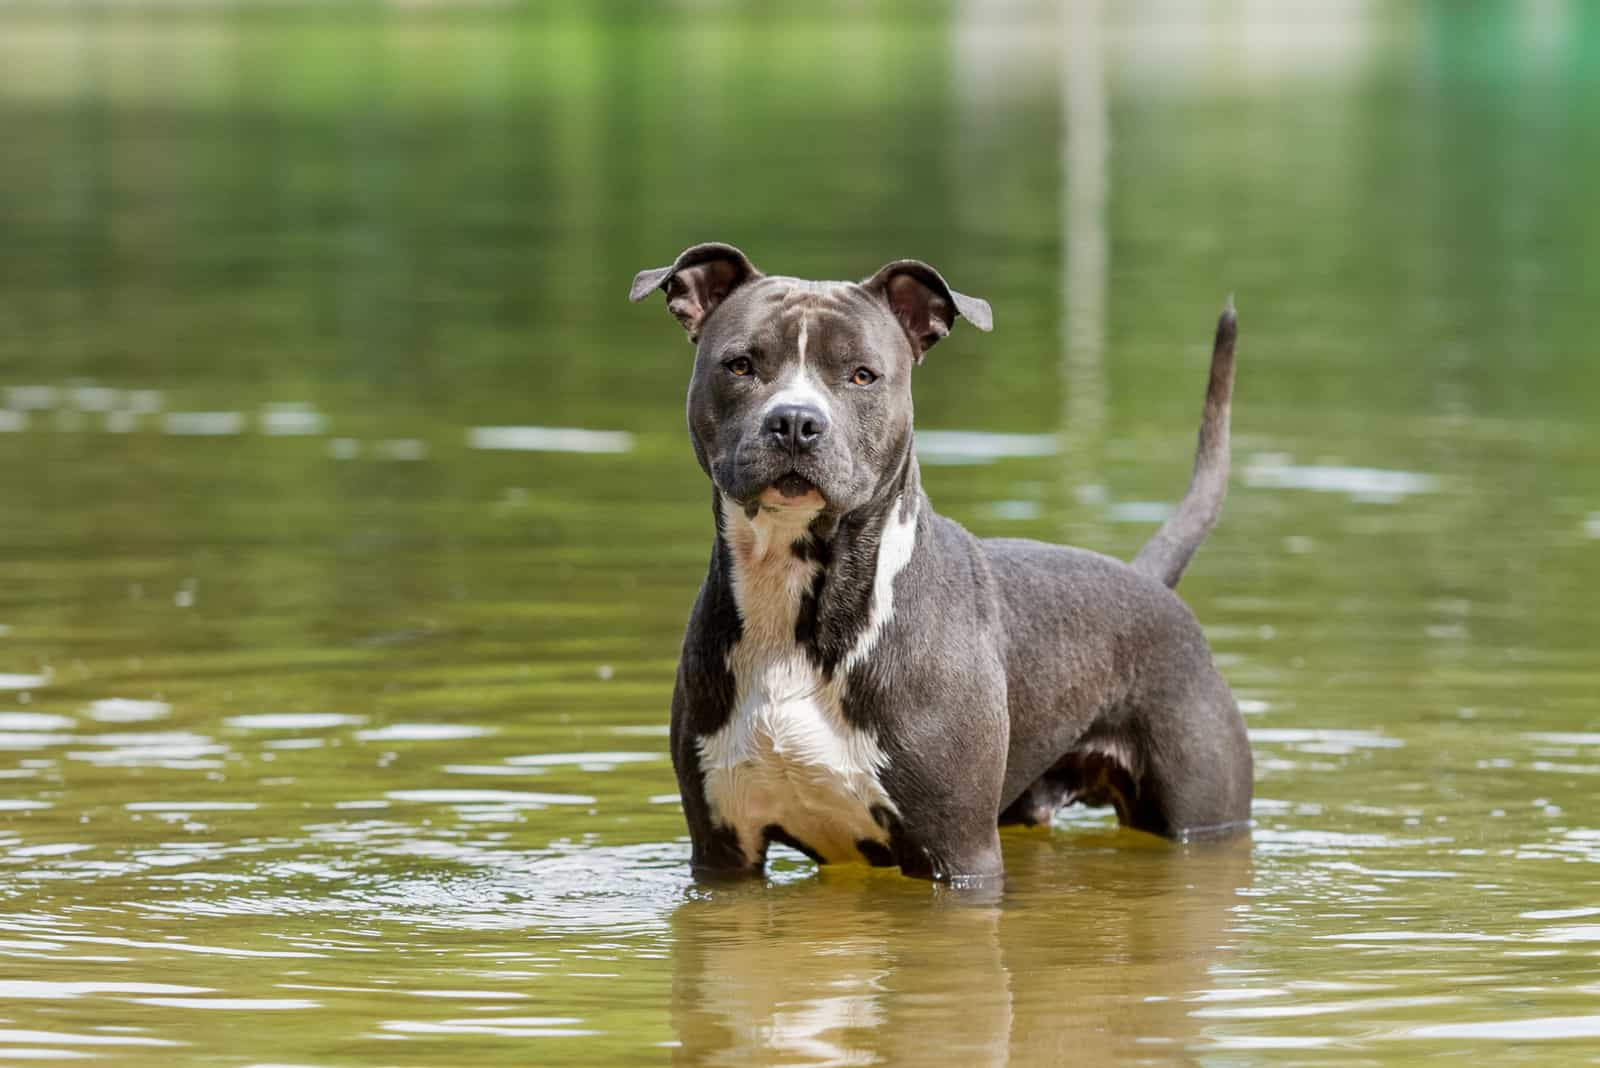 The American Pitbull Terrier stands in the water